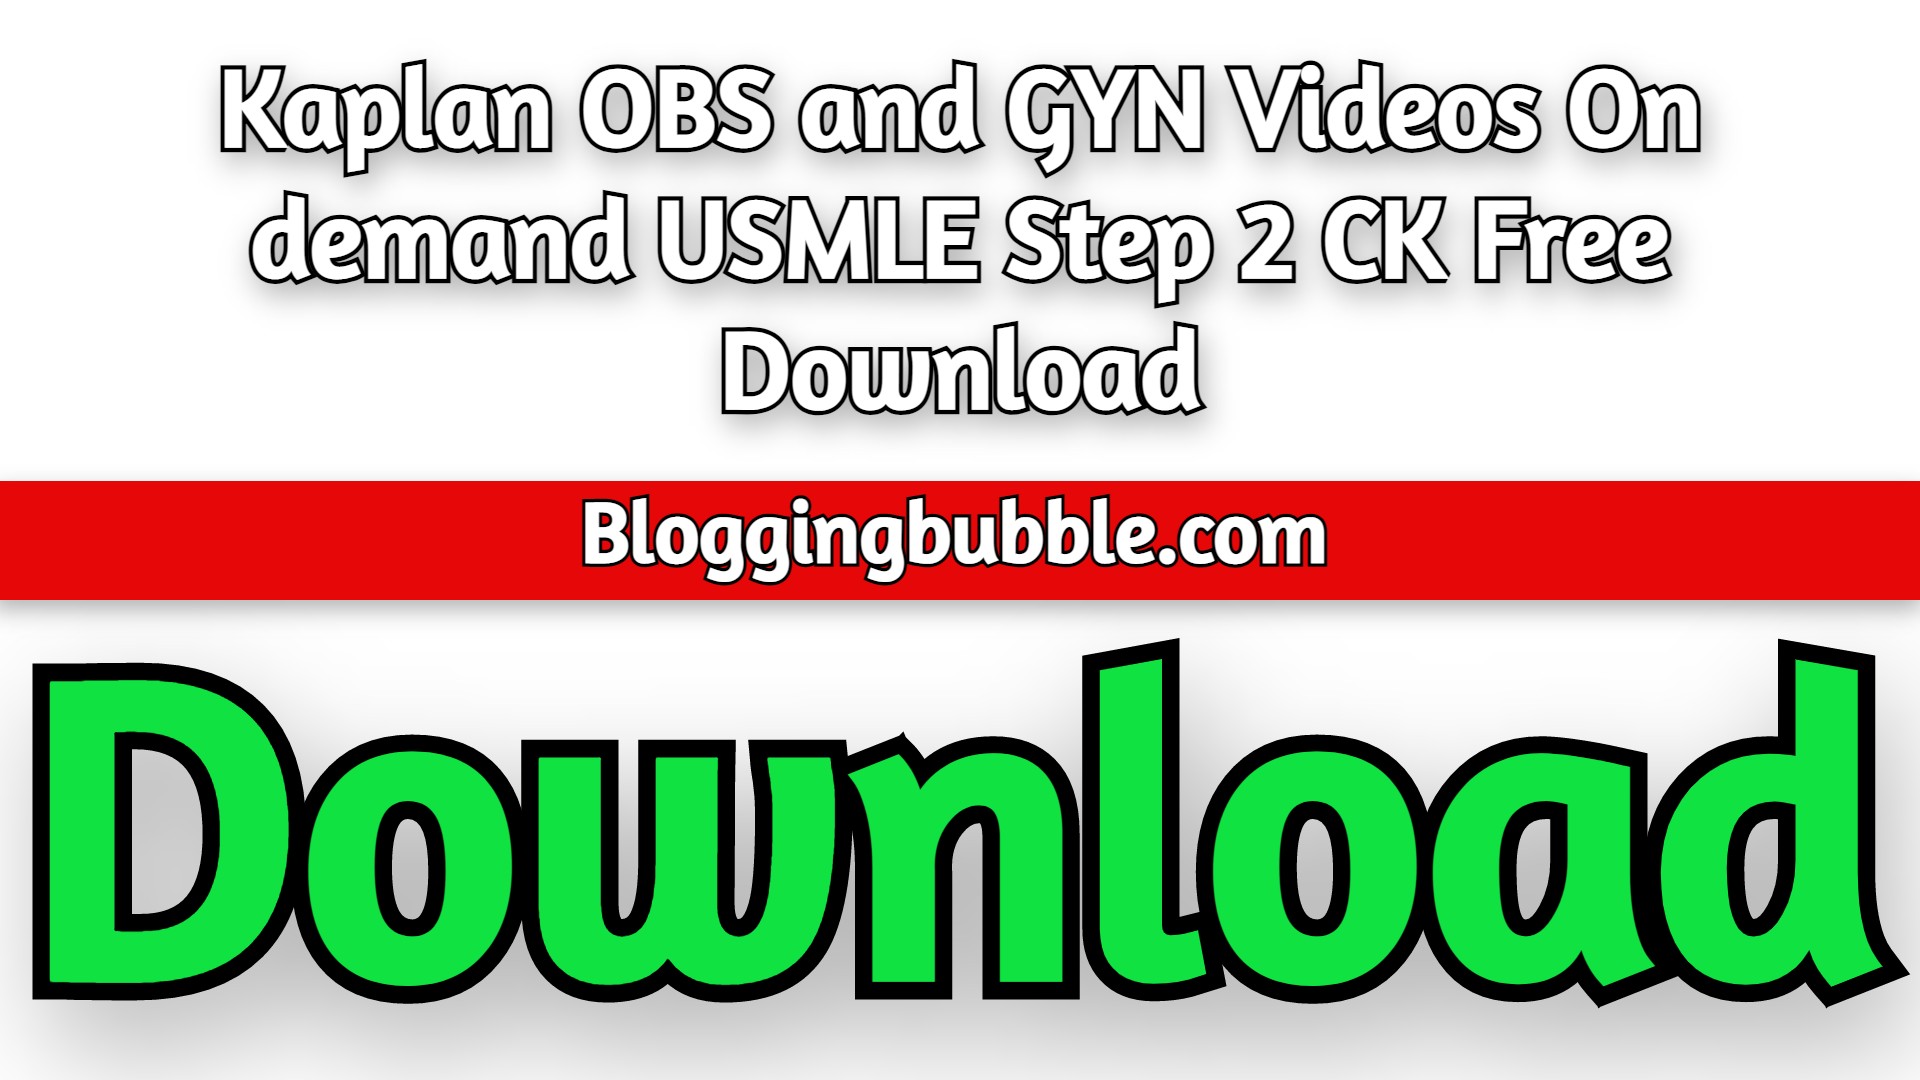 Kaplan OBS and GYN Videos 2022 On demand USMLE Step 2 CK Free Download